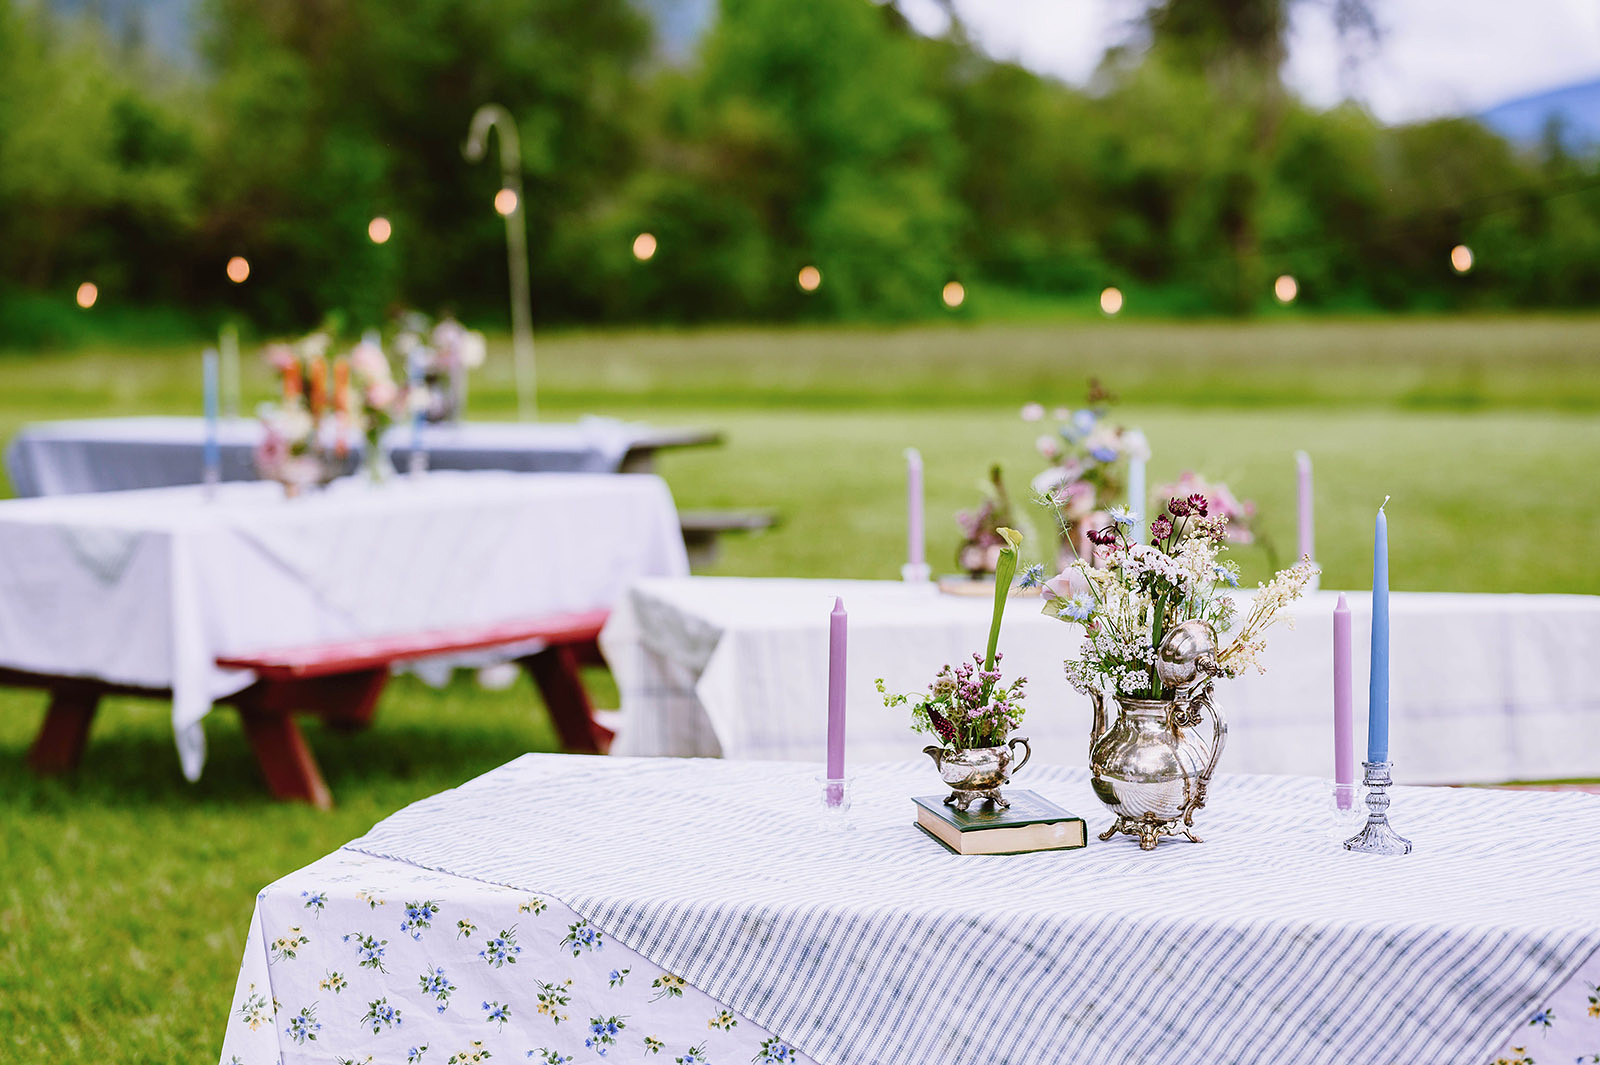 Picnic tables at Hollenbeck Park set with candles and flowers in teapot vases for a Trout Lake Wedding